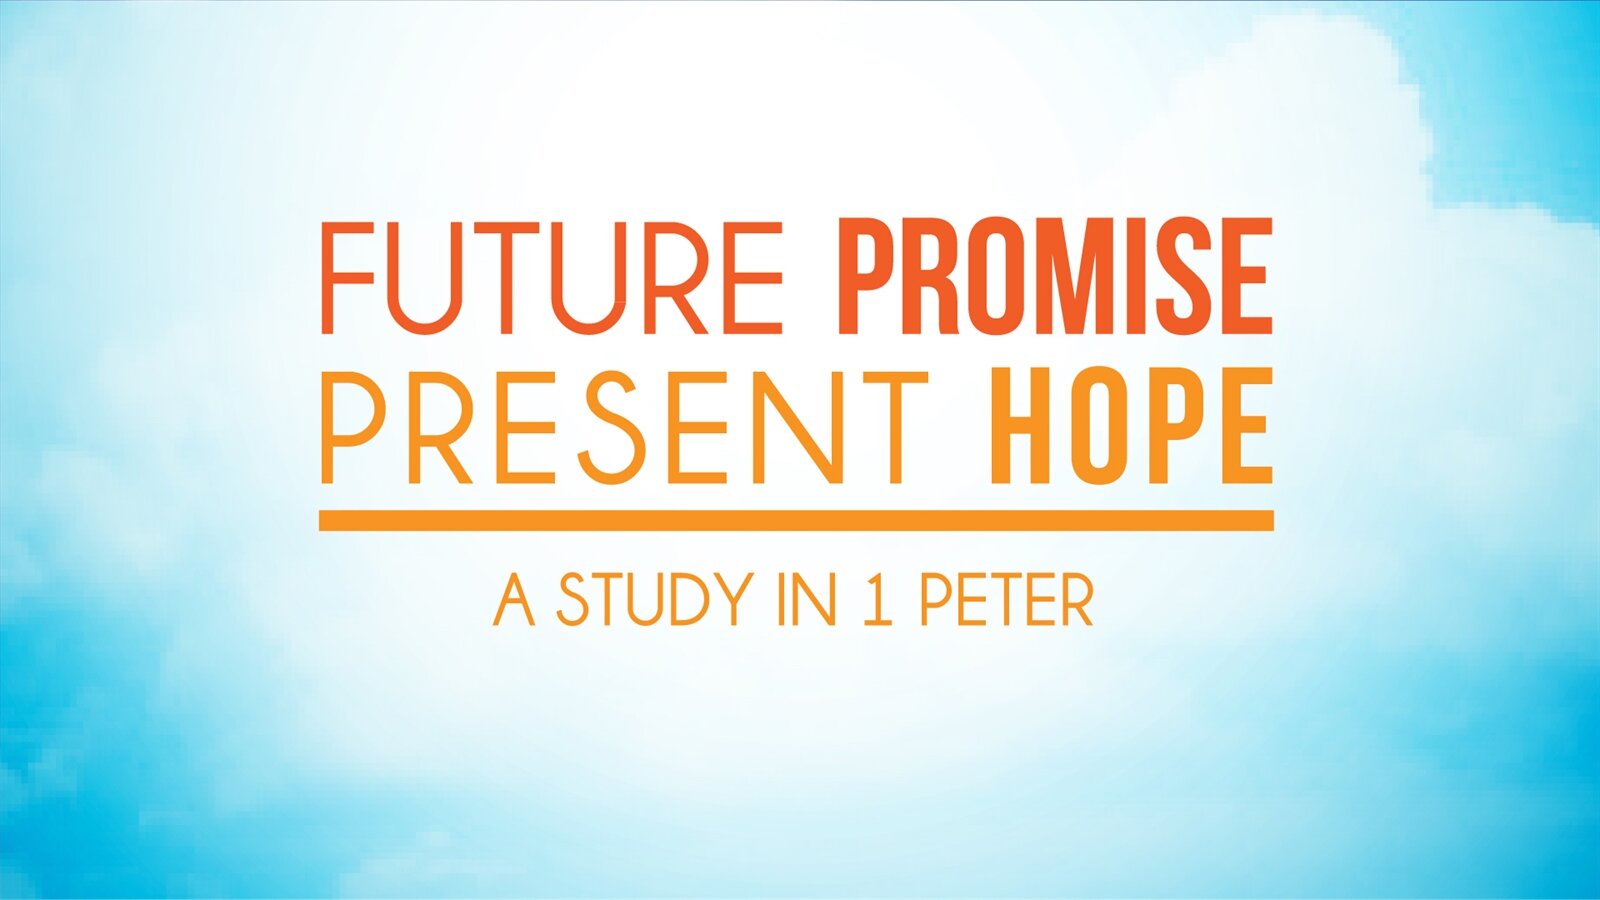 Message Series: Future Promise Present Hope - A Study in 1 Peter